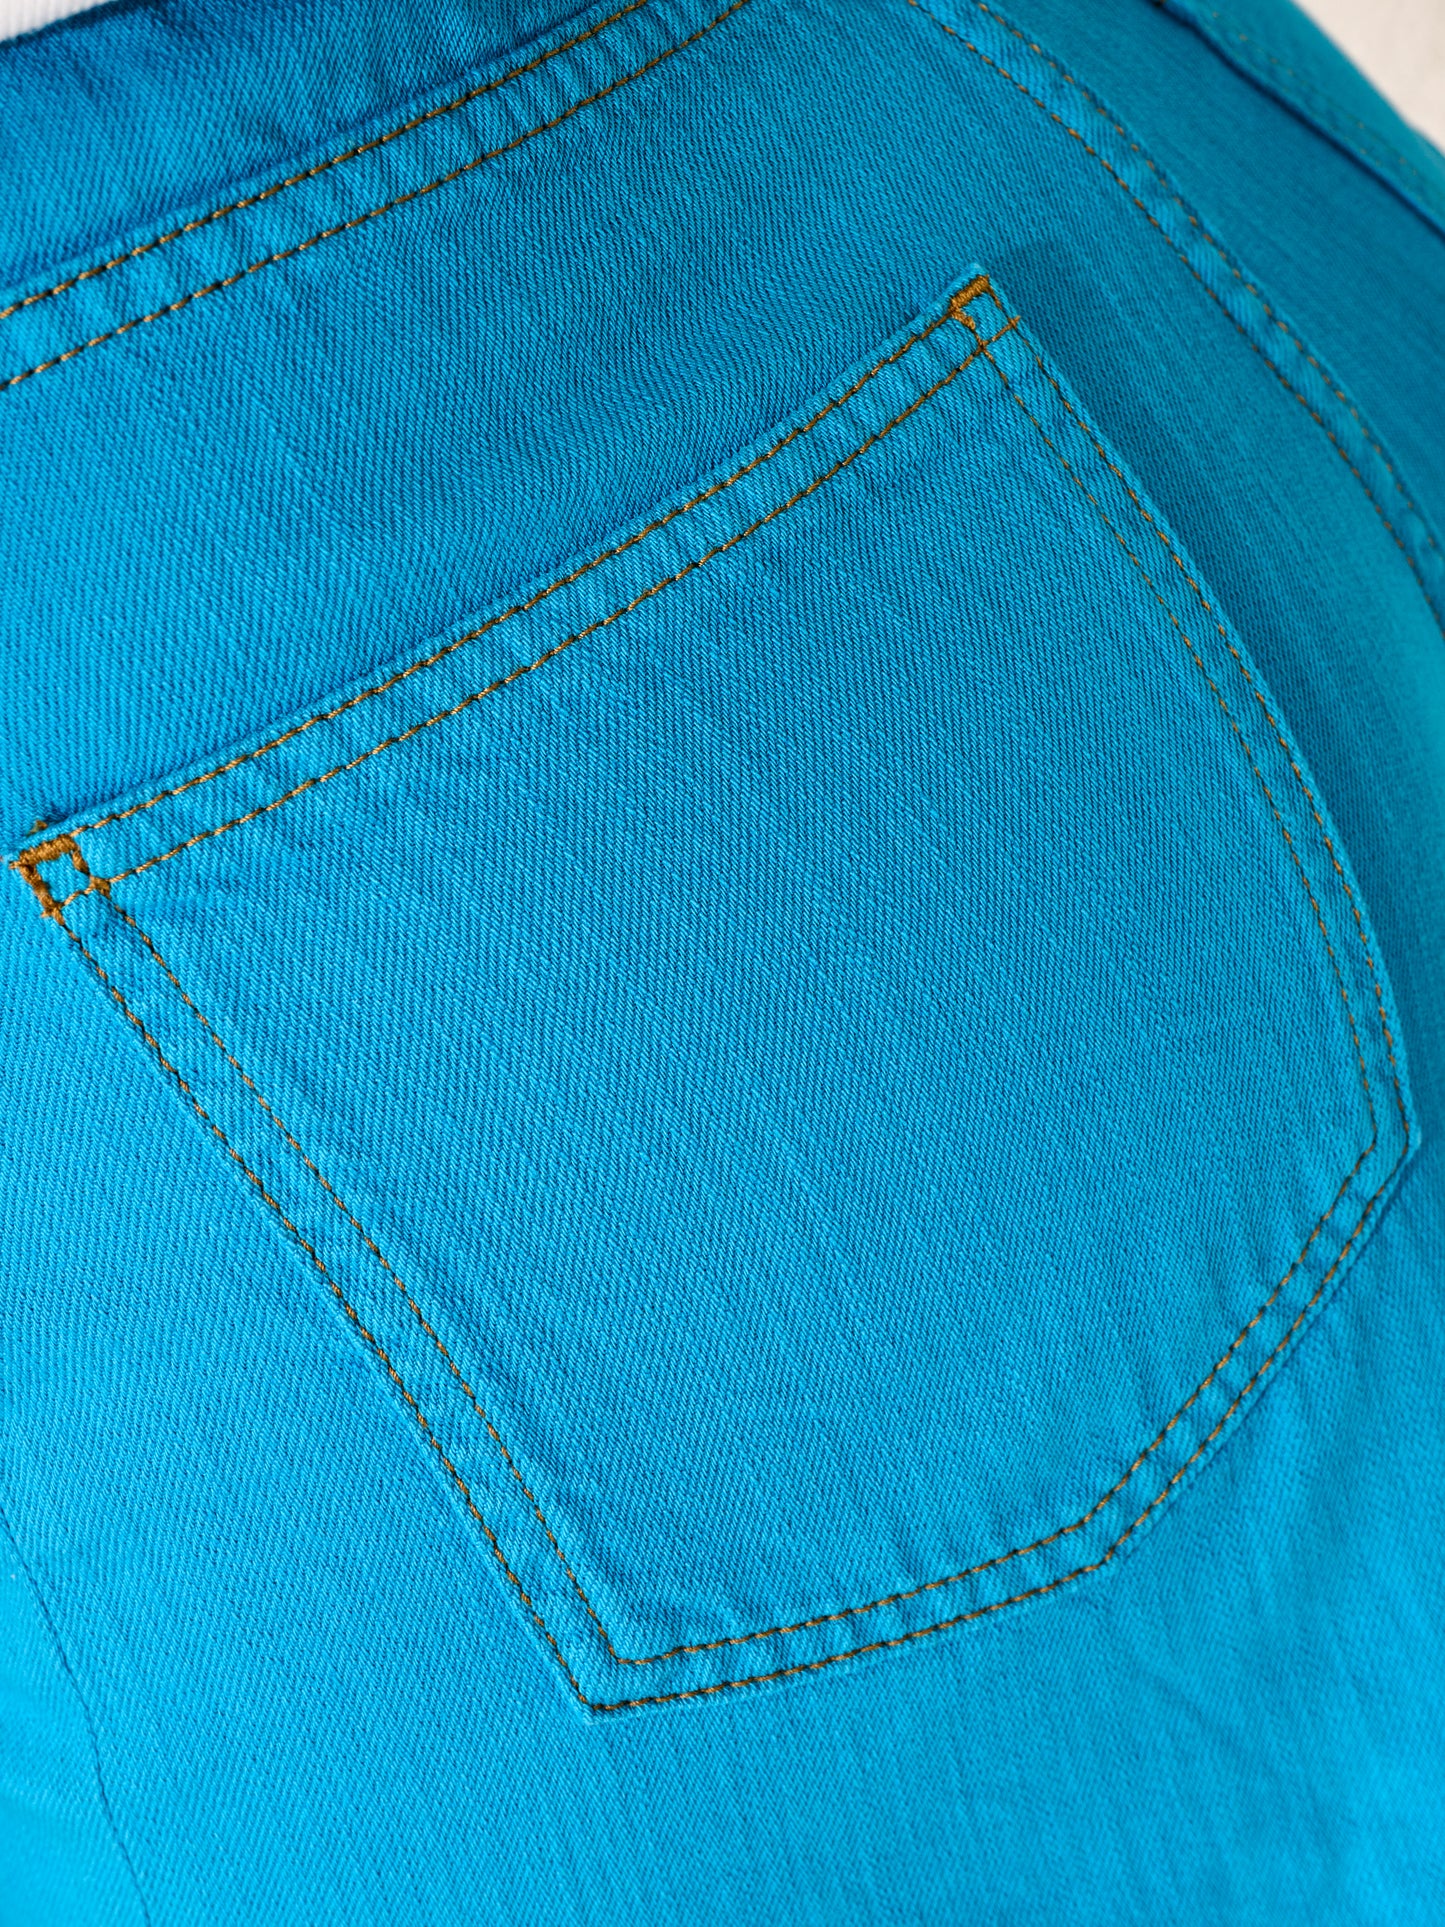 Bellerose - Party Shorts: Turquoise